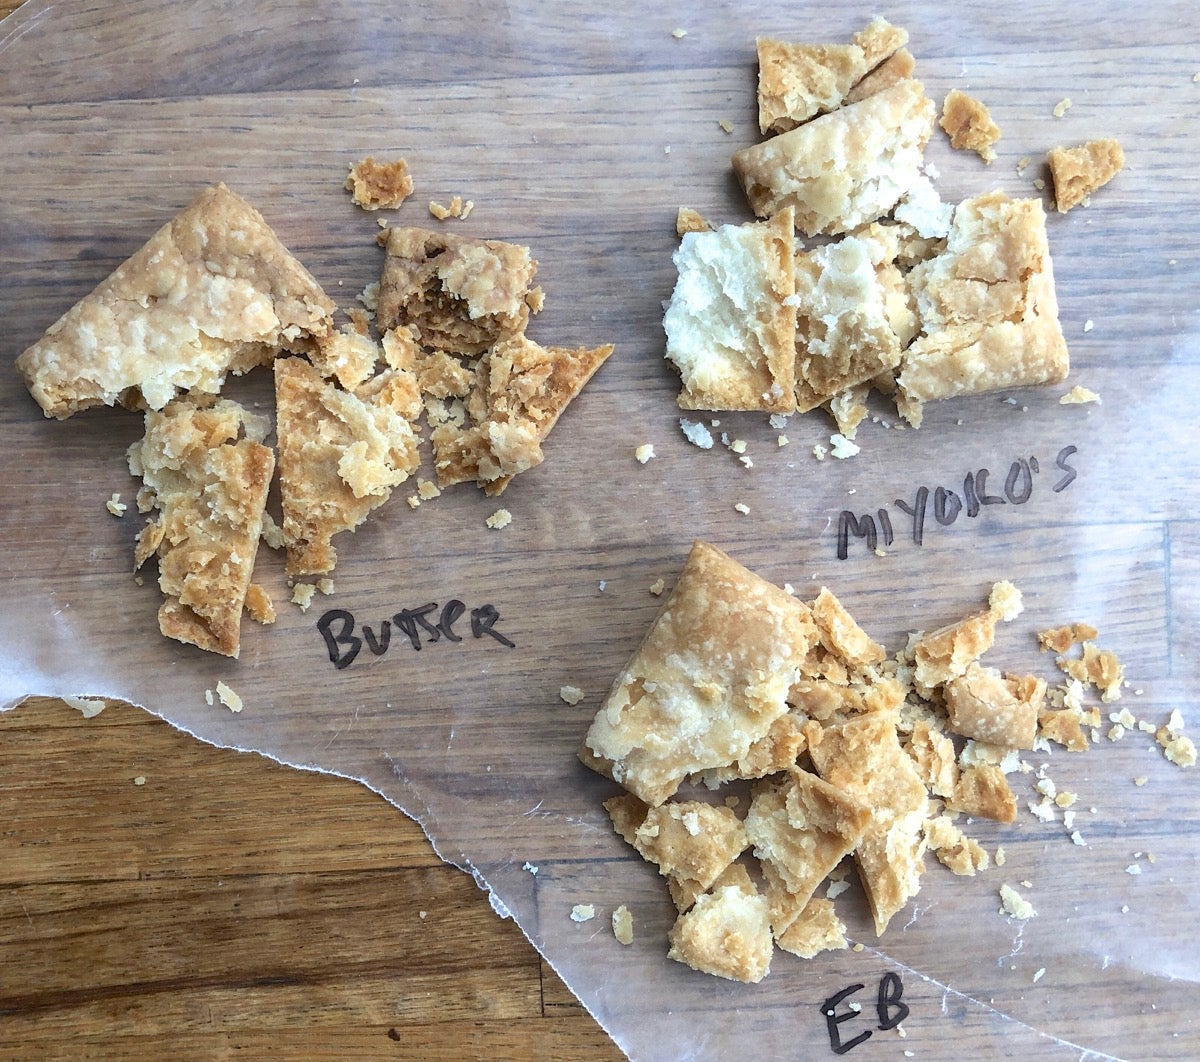 Three small squares of pie pastry made with three types of butter, crushed slightly to show their flaky texture